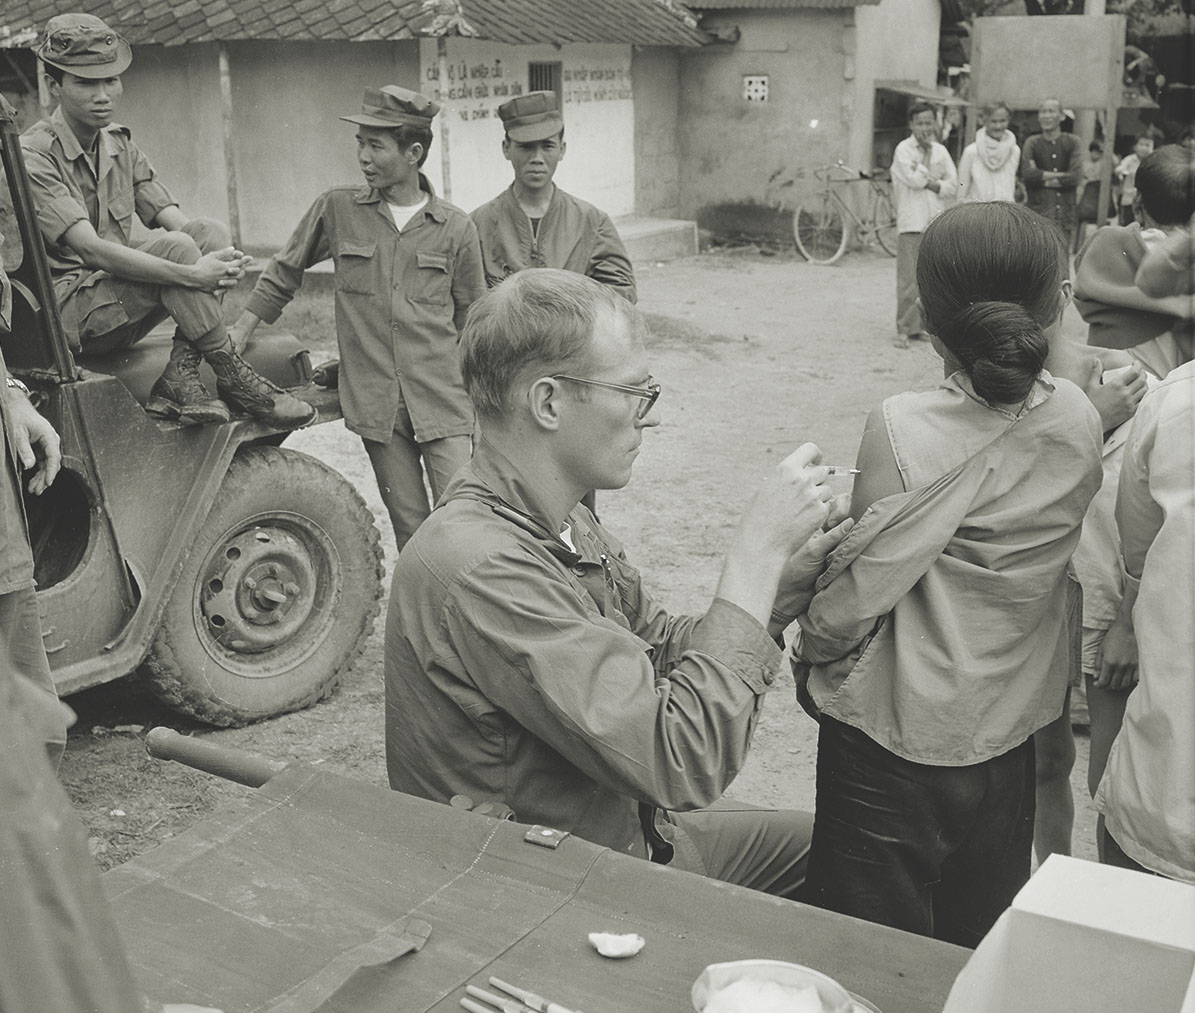 Air Force Capt. John R. Vydareny vaccinates a young Vietnamese woman against plague during a Medical Civic Action Program visit to a village near Phu Cat Air Base in central South Vietnam. Civilians suffered from war-related injuries in addition to health problems caused by living conditions in an underdeveloped country. / Alamy